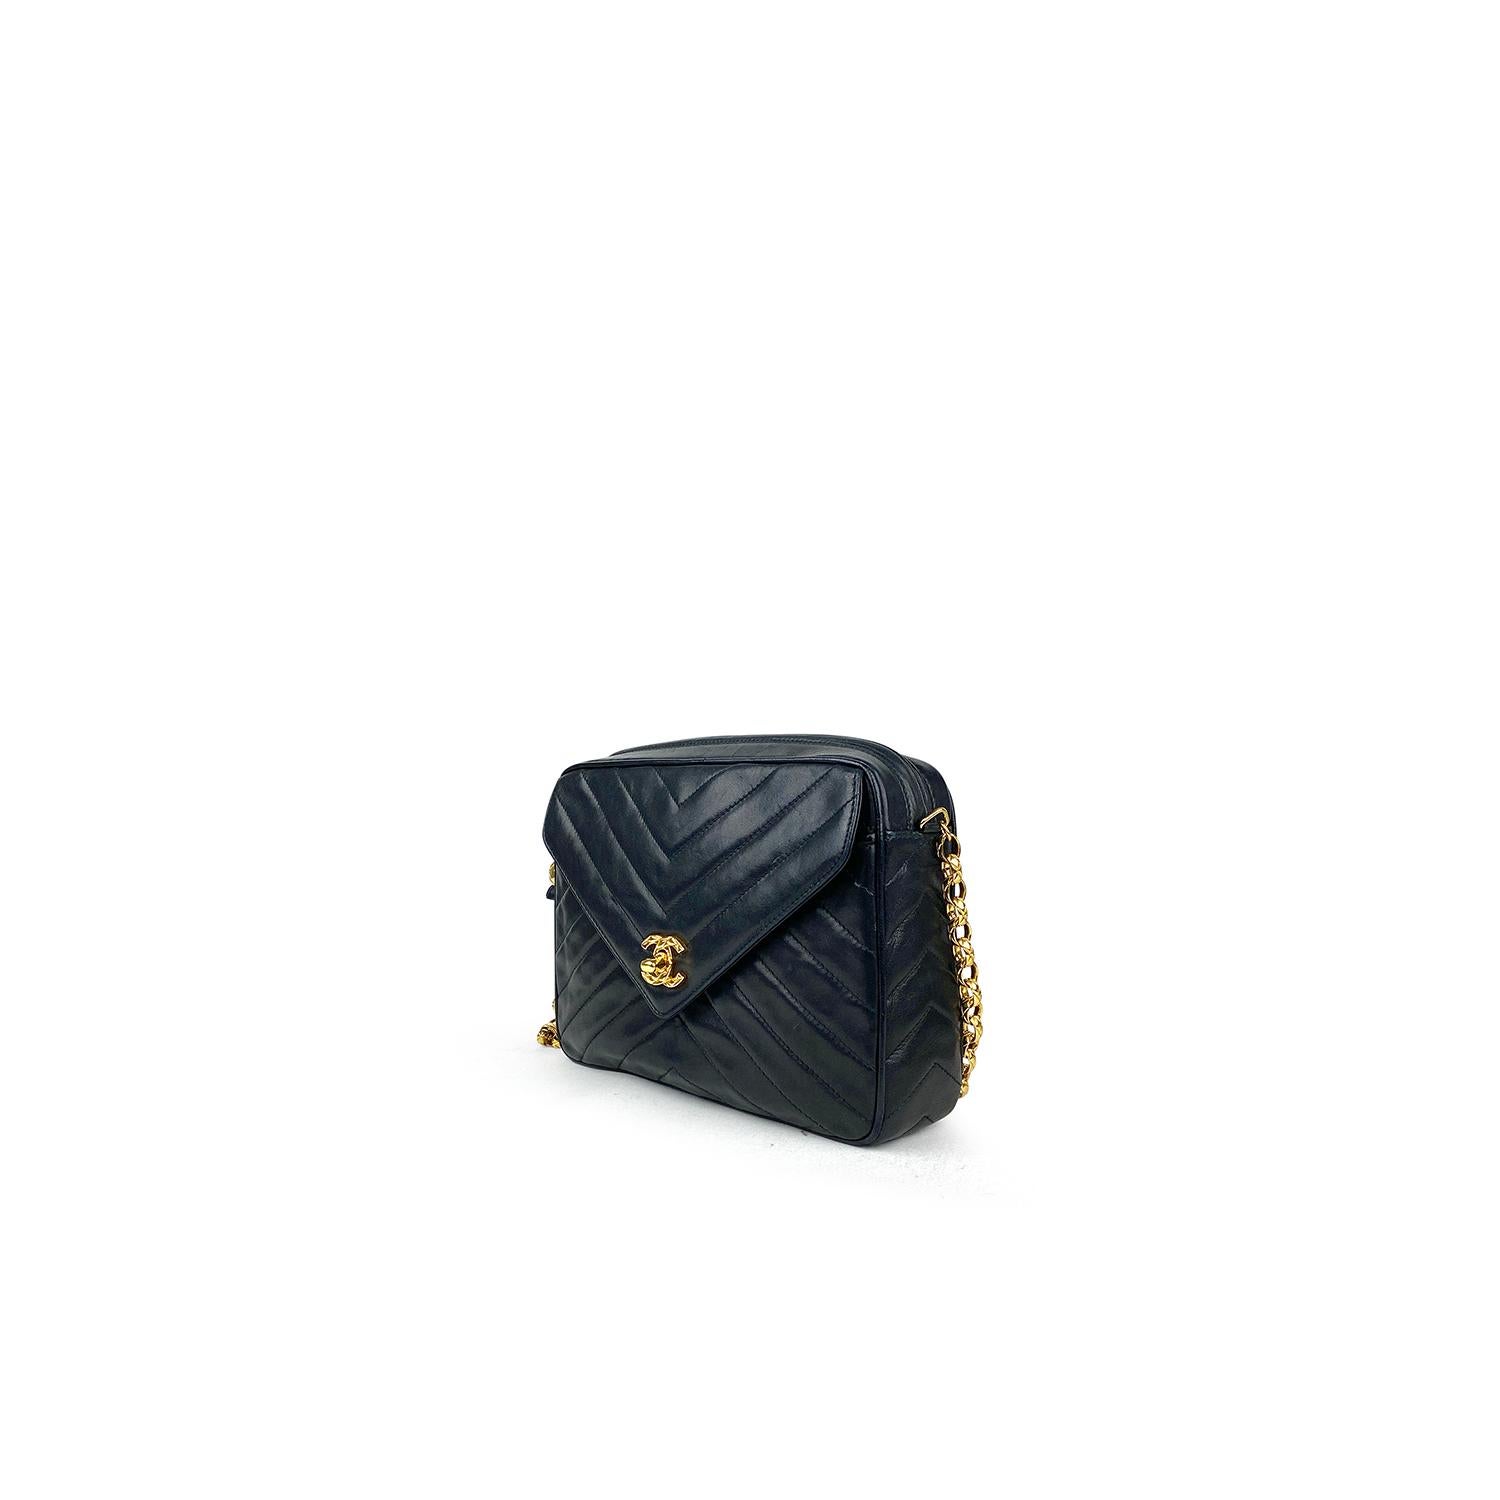 Black leather Chanel Camera crossbody bag with

- Gold-tone hardware
- Single chain-link shoulder strap
- Single exterior pocket at front featuring CC turn-lock closure
- Tonal leather lining, dual pockets at interior walls; one with zip closure and